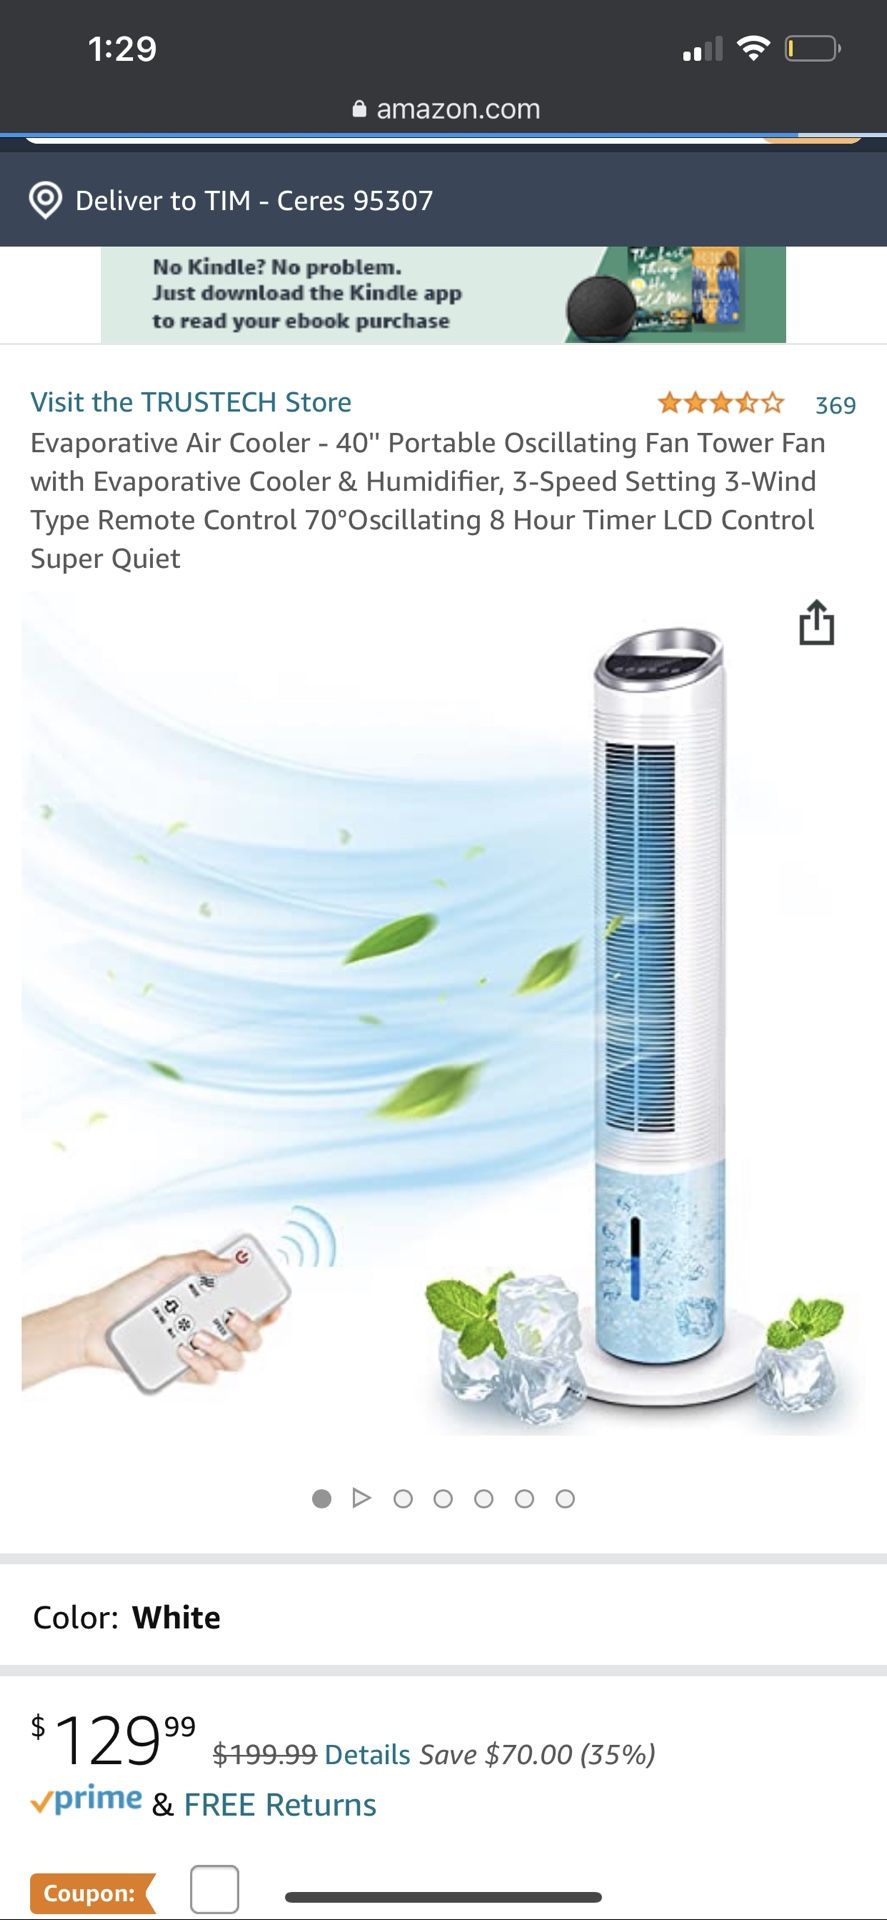 Tower Fan & Evaporative Air Cooler 2 in 1】This Trustech tower fan can be used alone or as an evaporative air cooler. Water curtain system with 2L wate